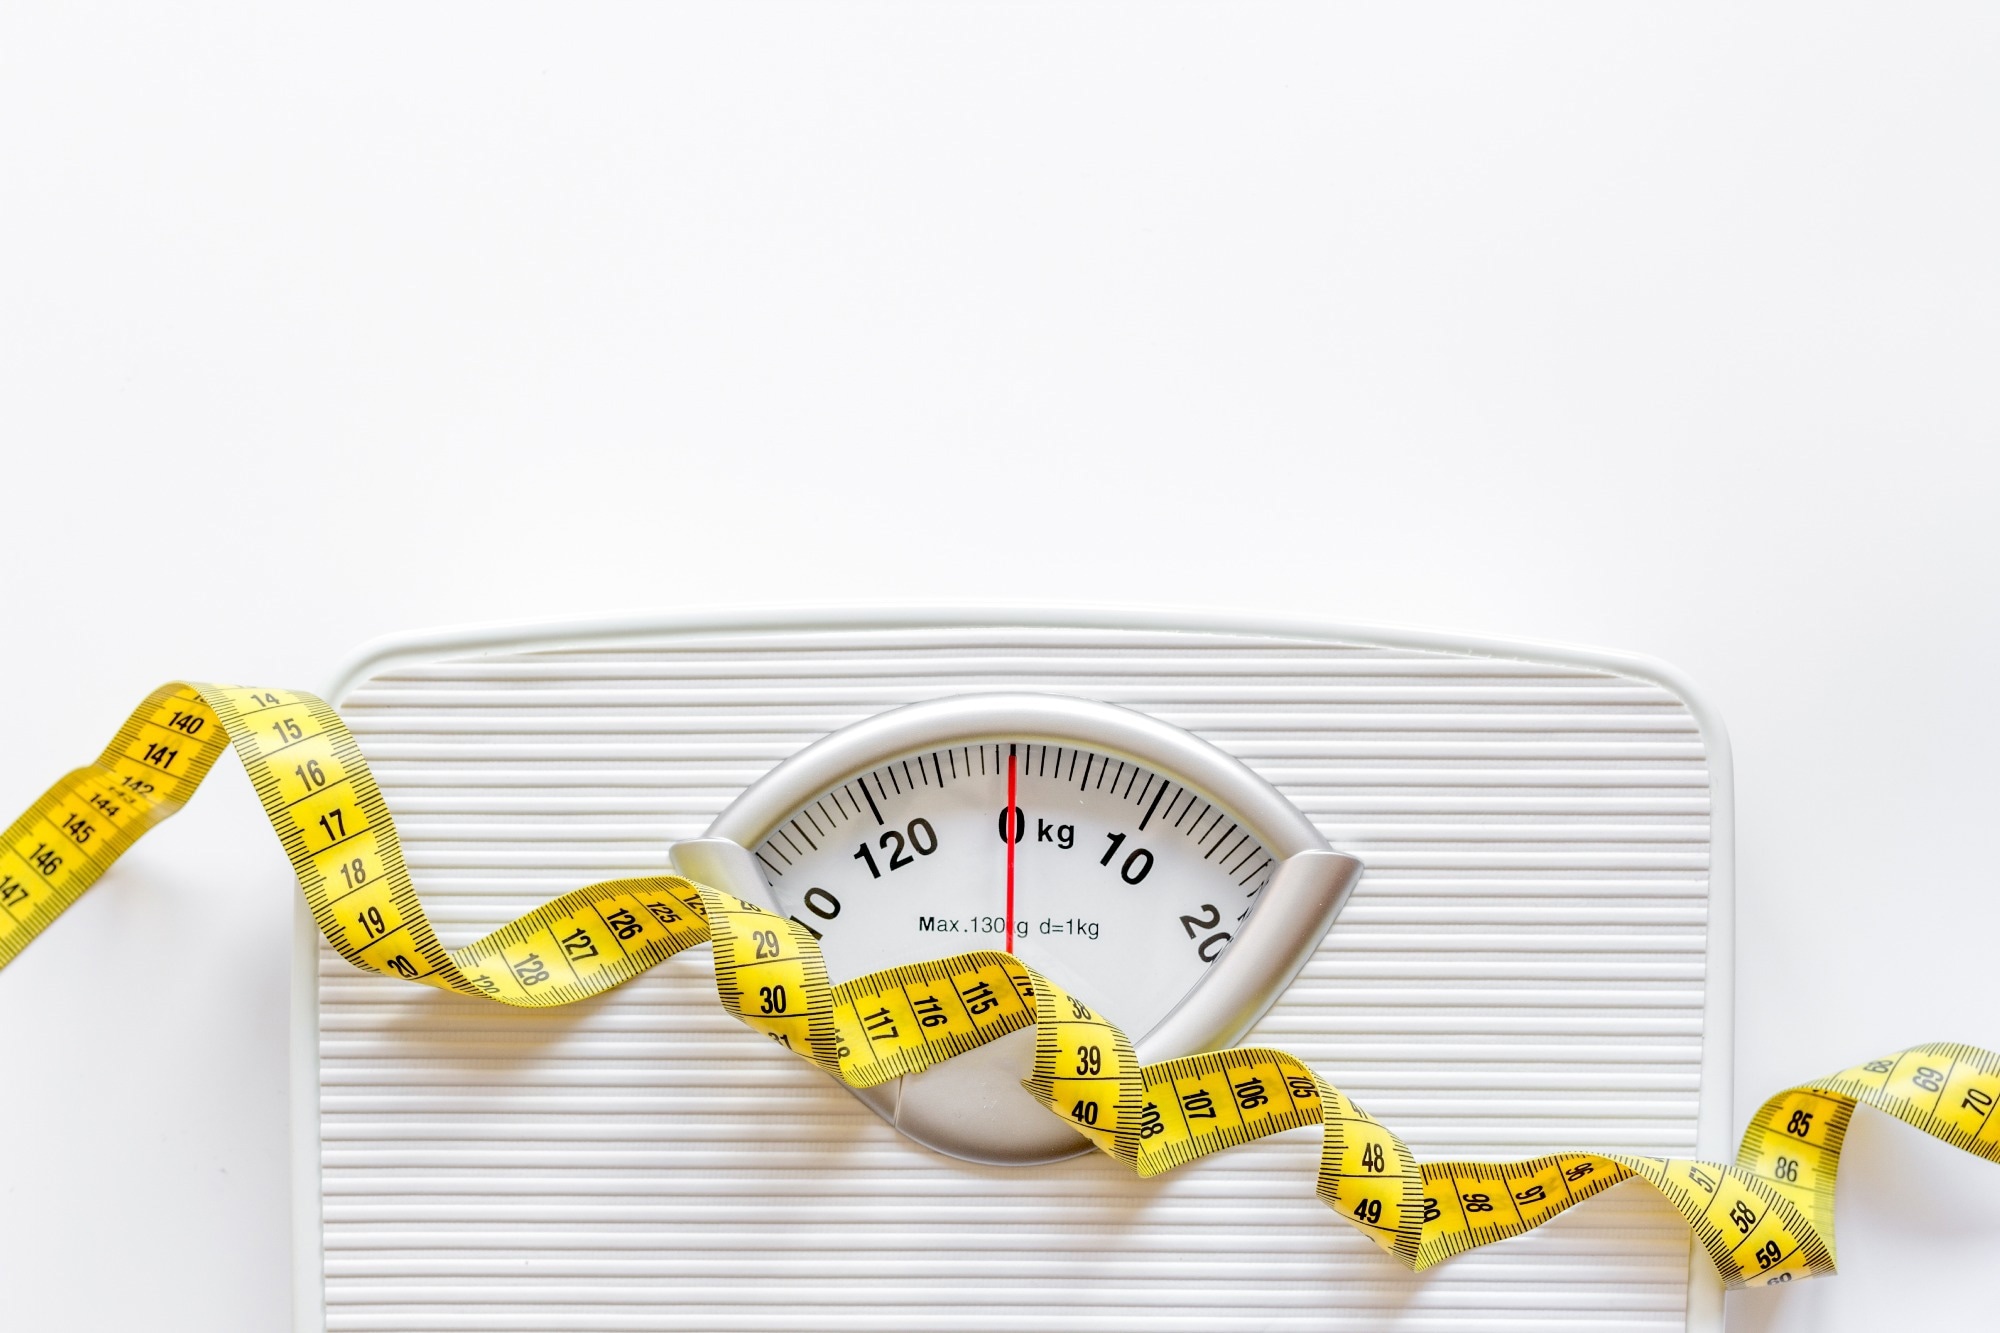 Study: Distinct factors associated with short-term and long-term weight loss induced by low-fat or low-carbohydrate diet intervention. Image Credit: 279photo Studio/Shutterstock